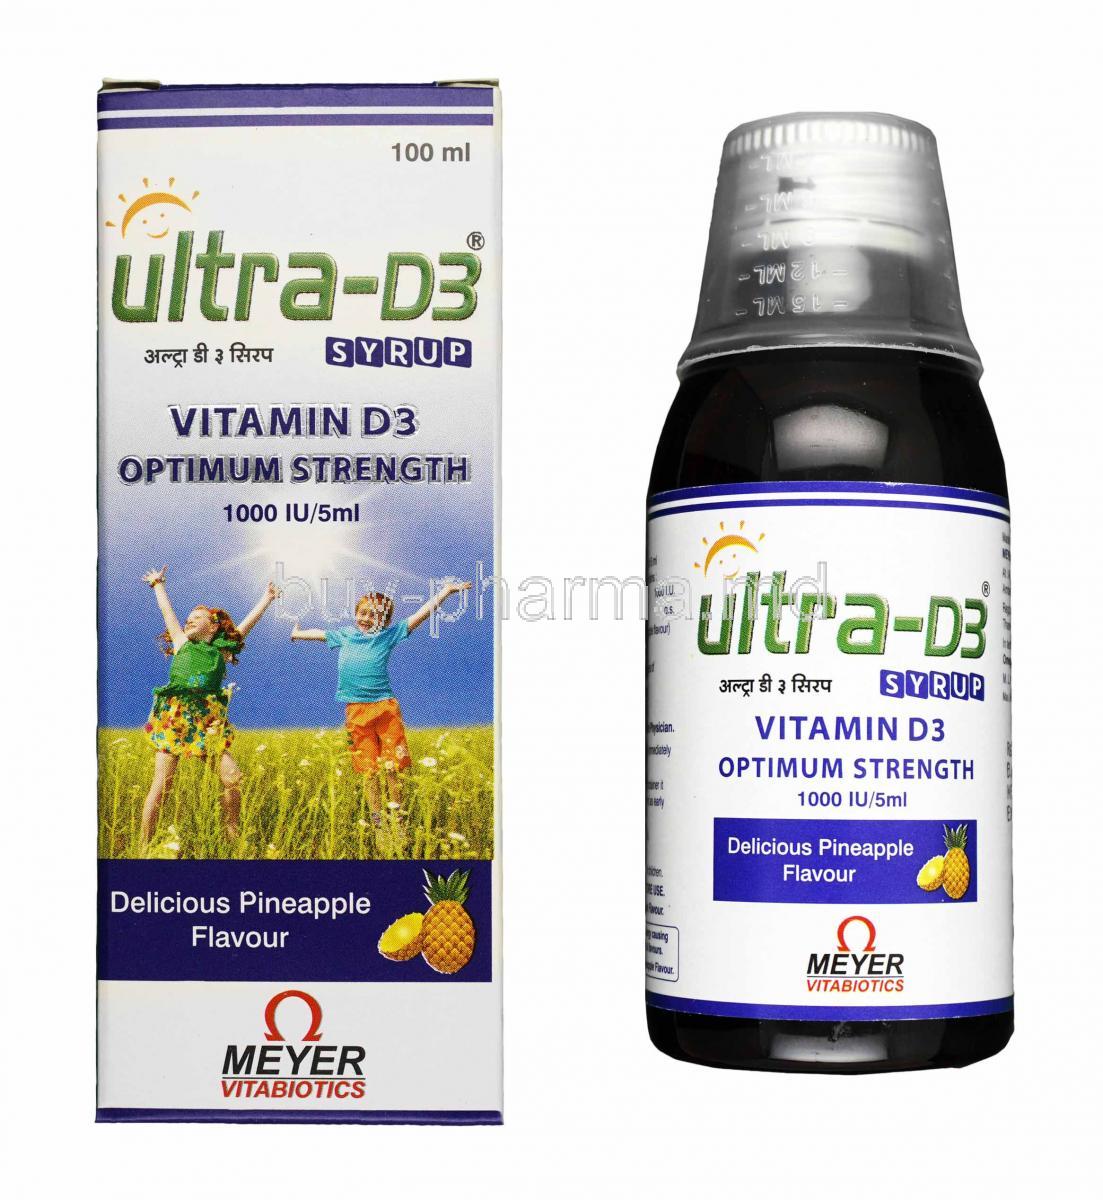 Ultra-D3 Syrup, Vitamin D3 box and bottle